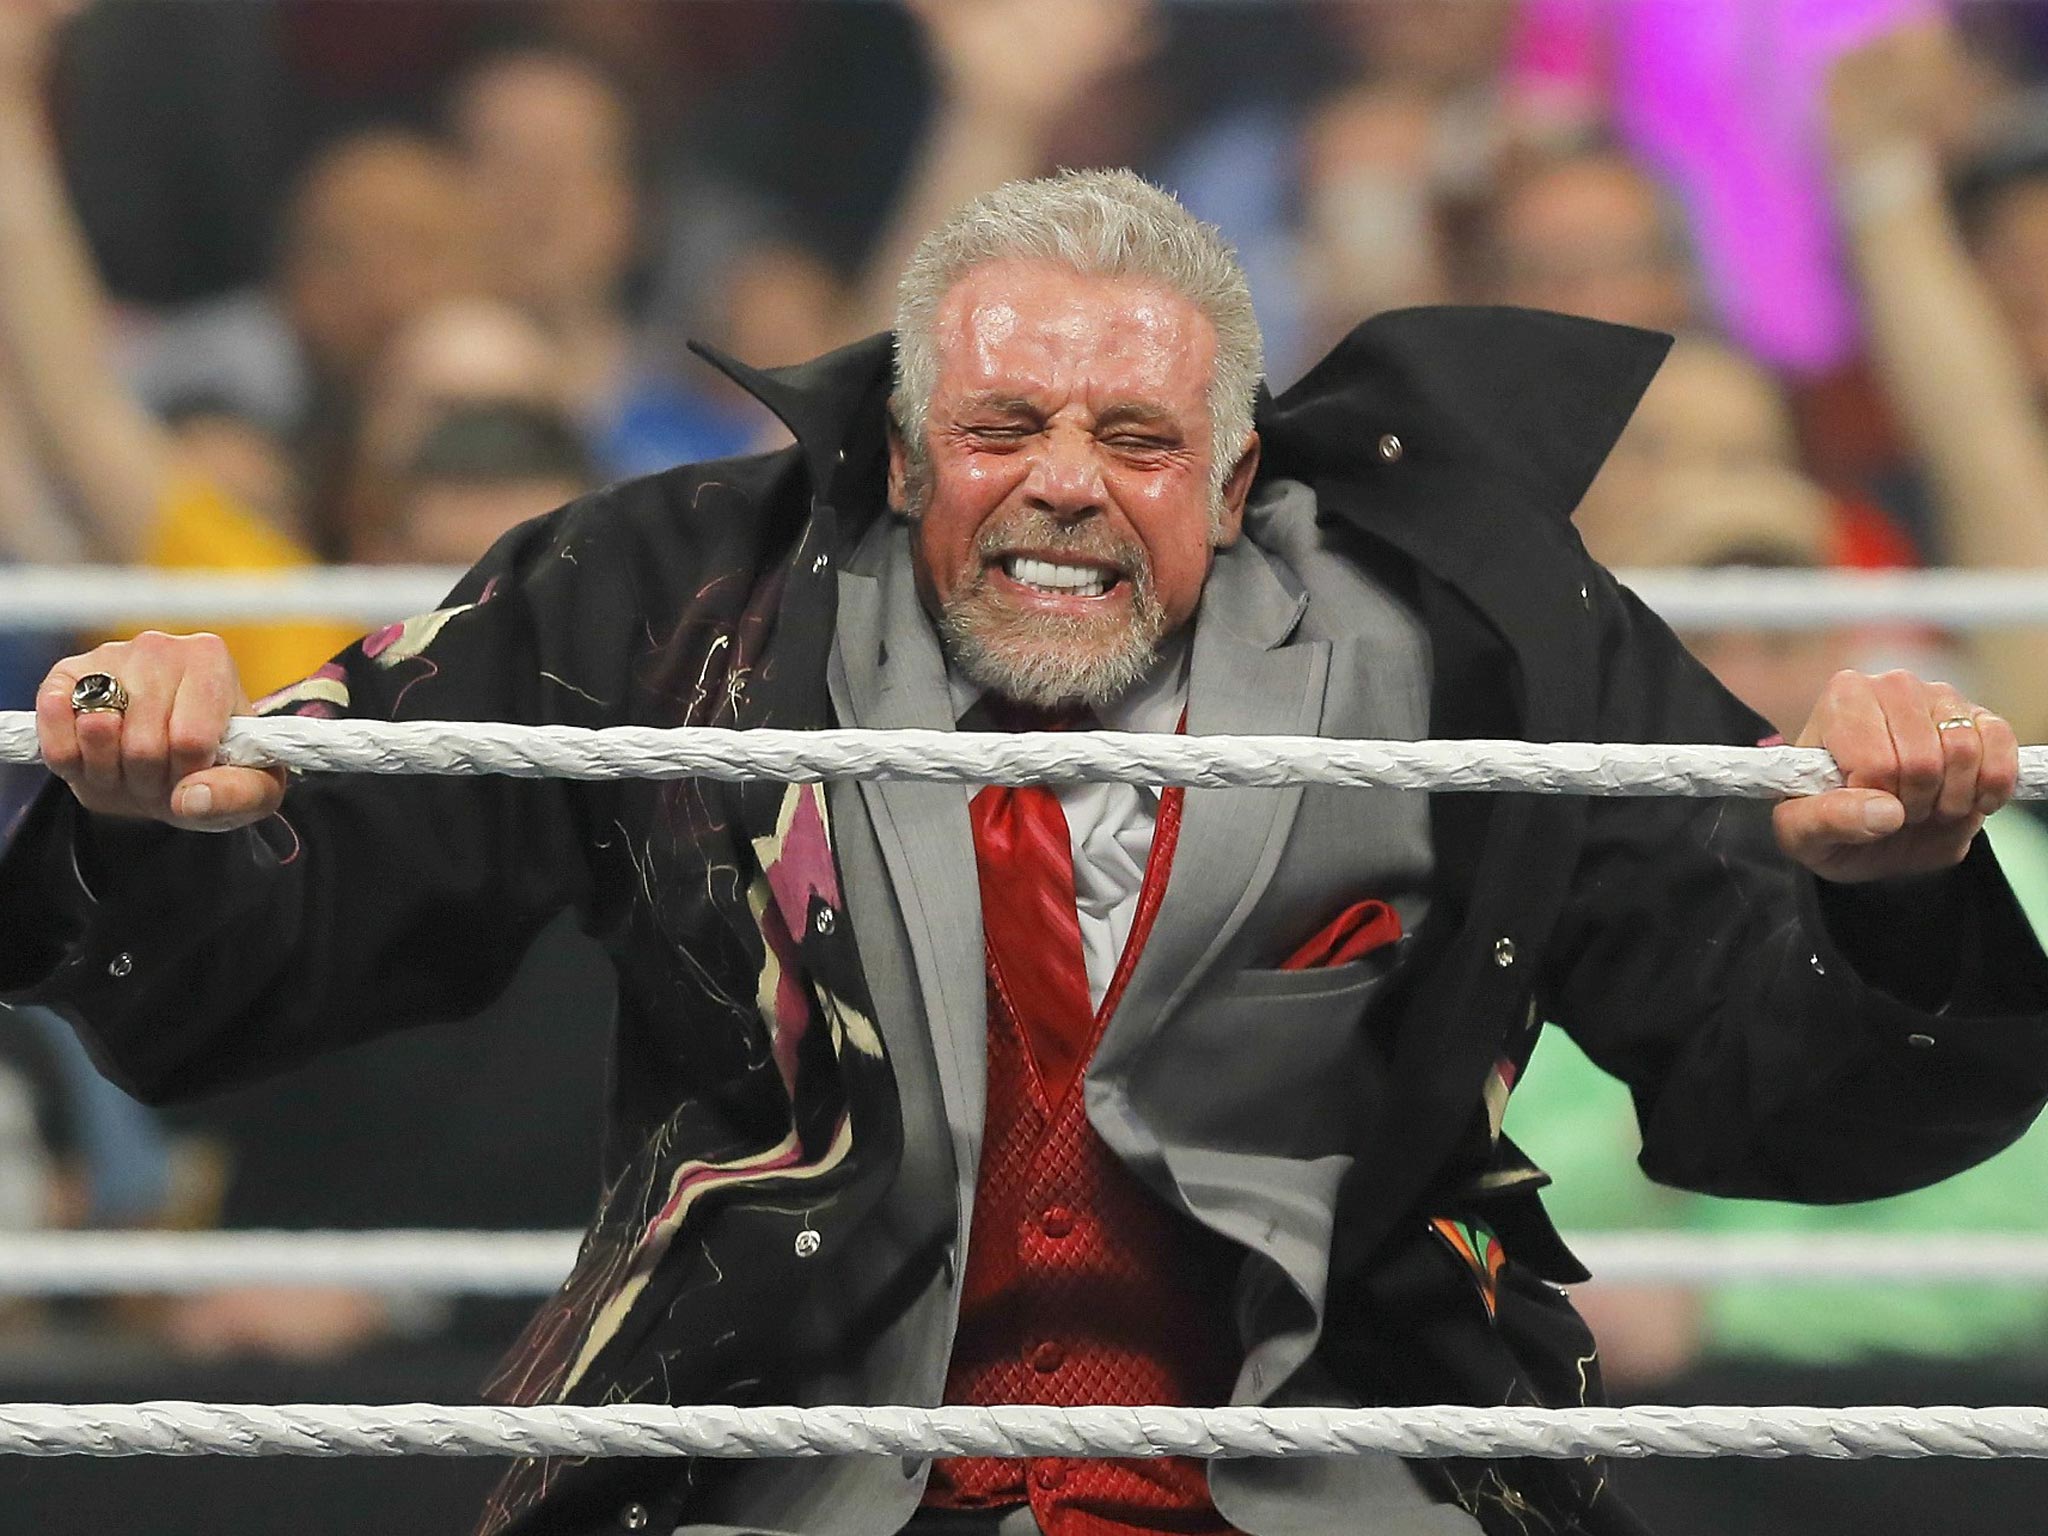 James Hellwig, here performing his trademark ring entrance, returned to WWE for the first time in 17 years last Sunday